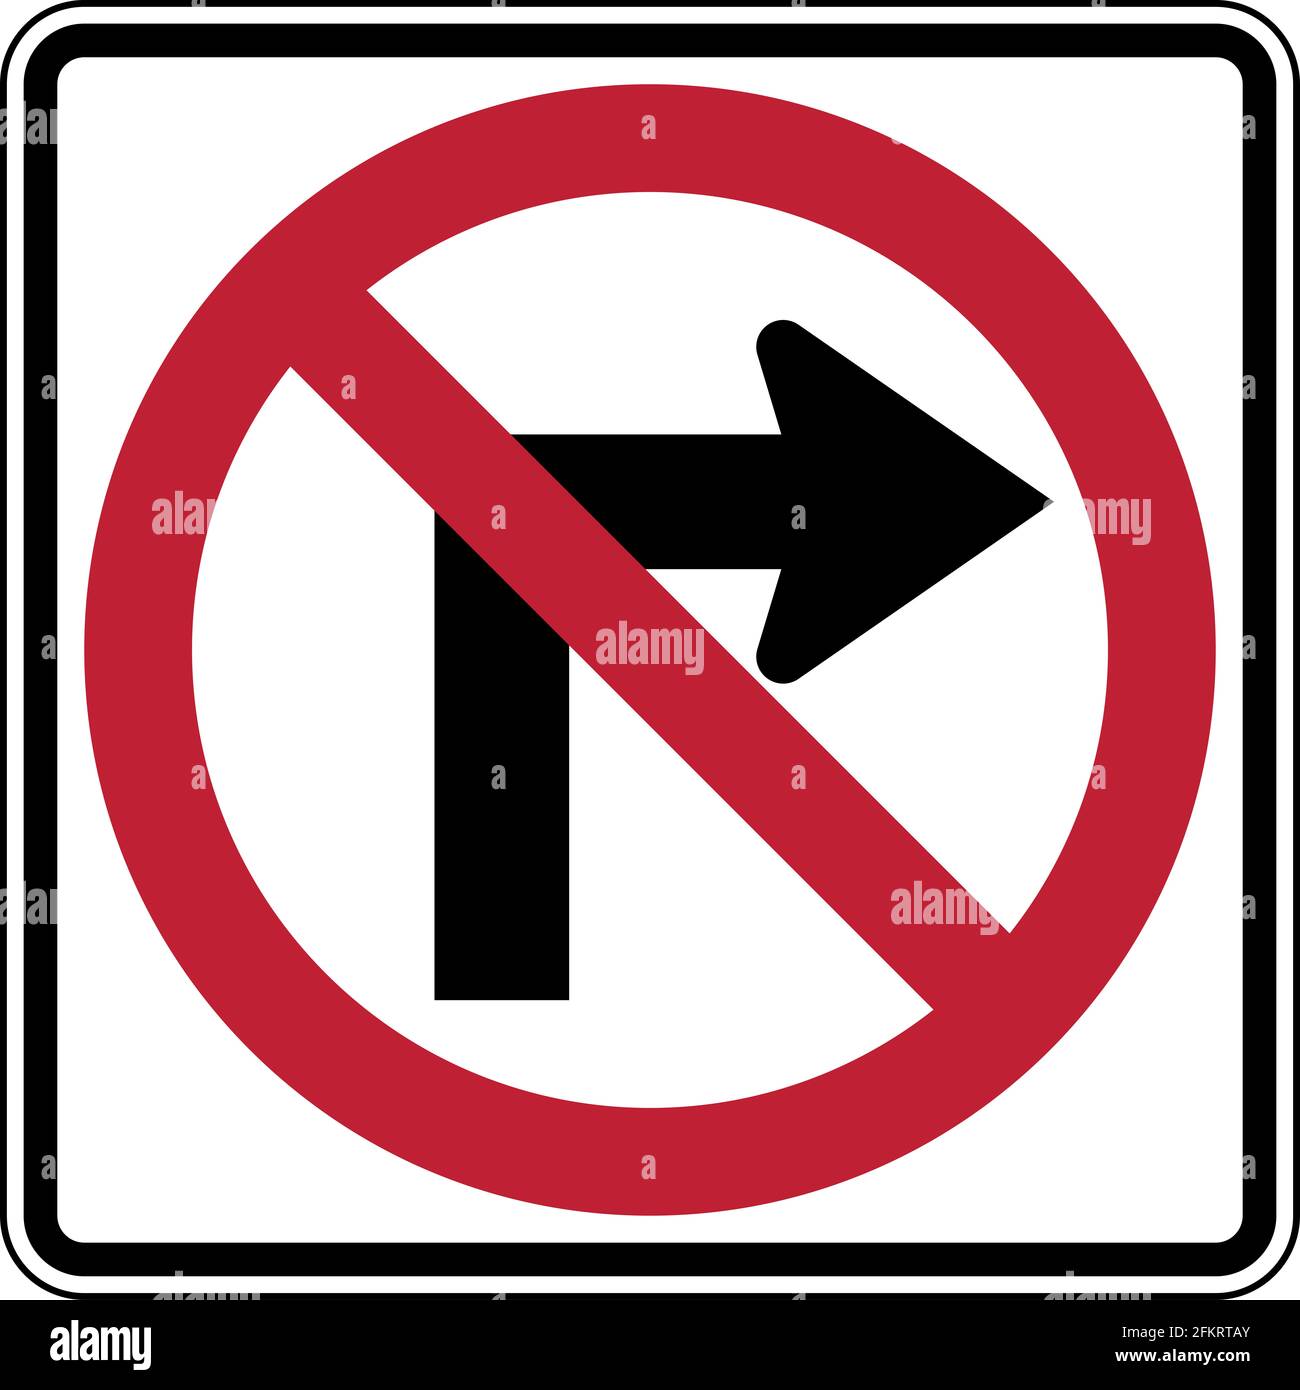 No Right Turn Official US Road Sign Illustration Stock Photo